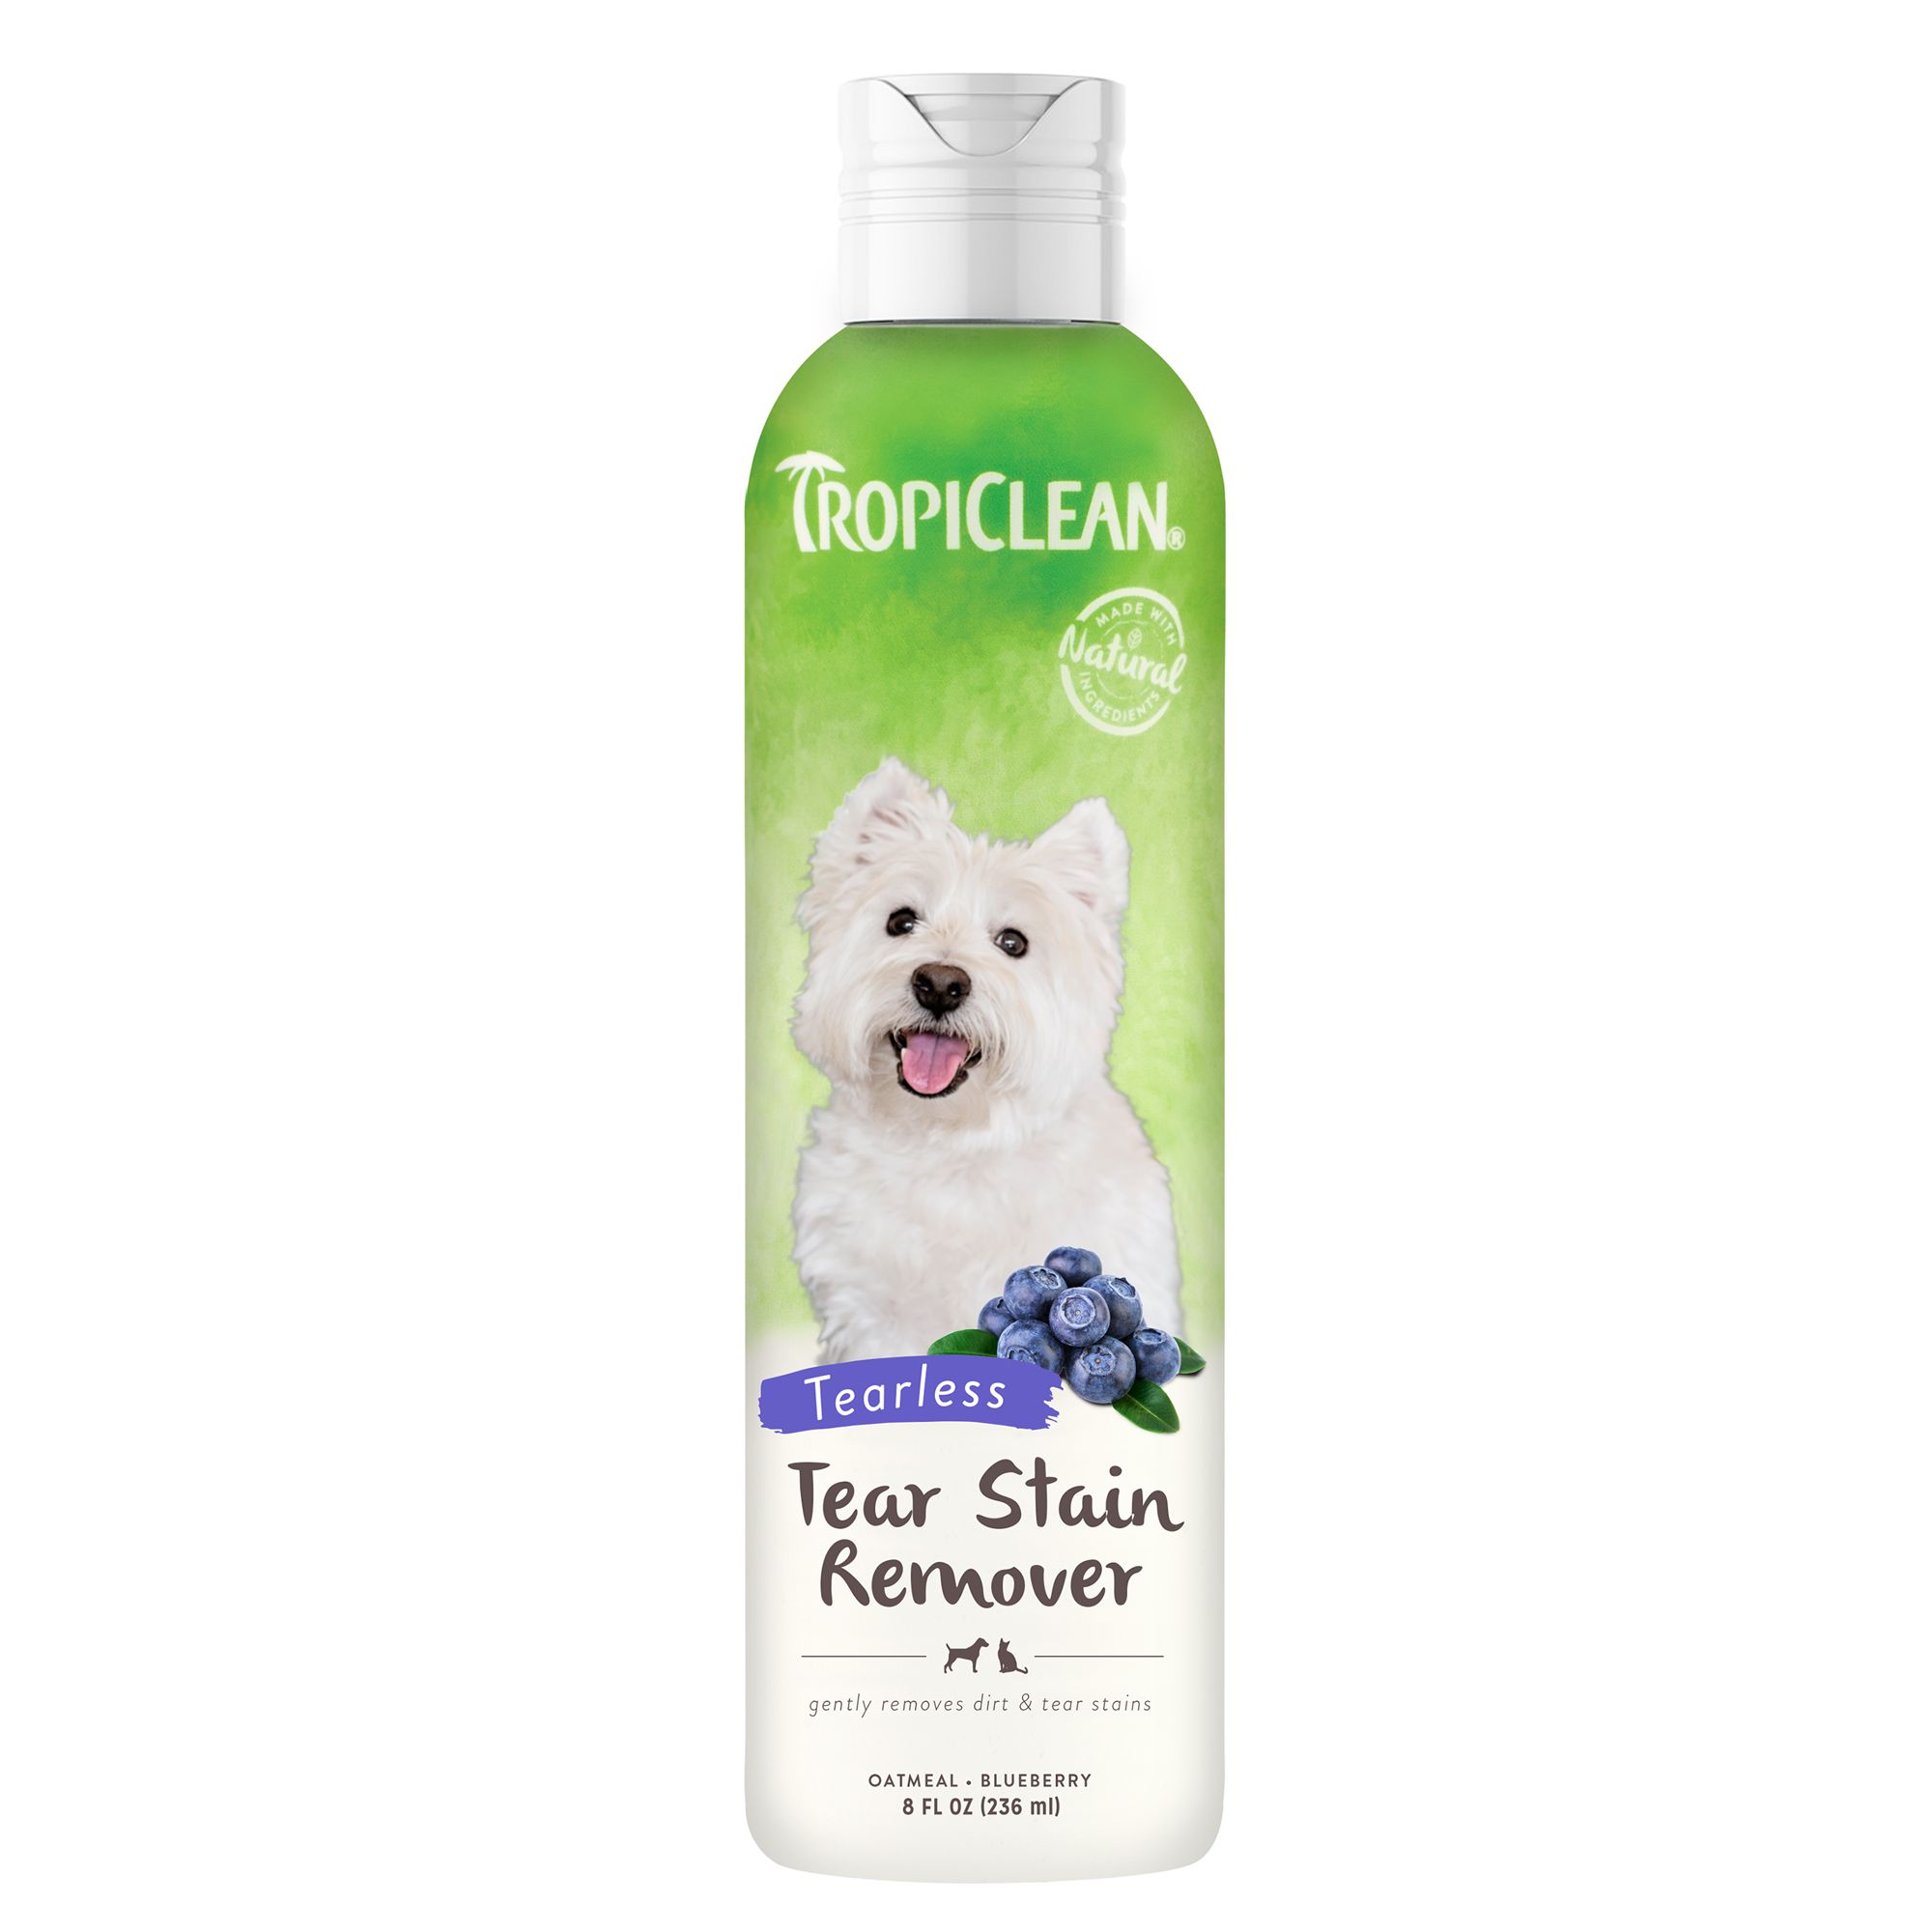 tear stain treatment for dogs